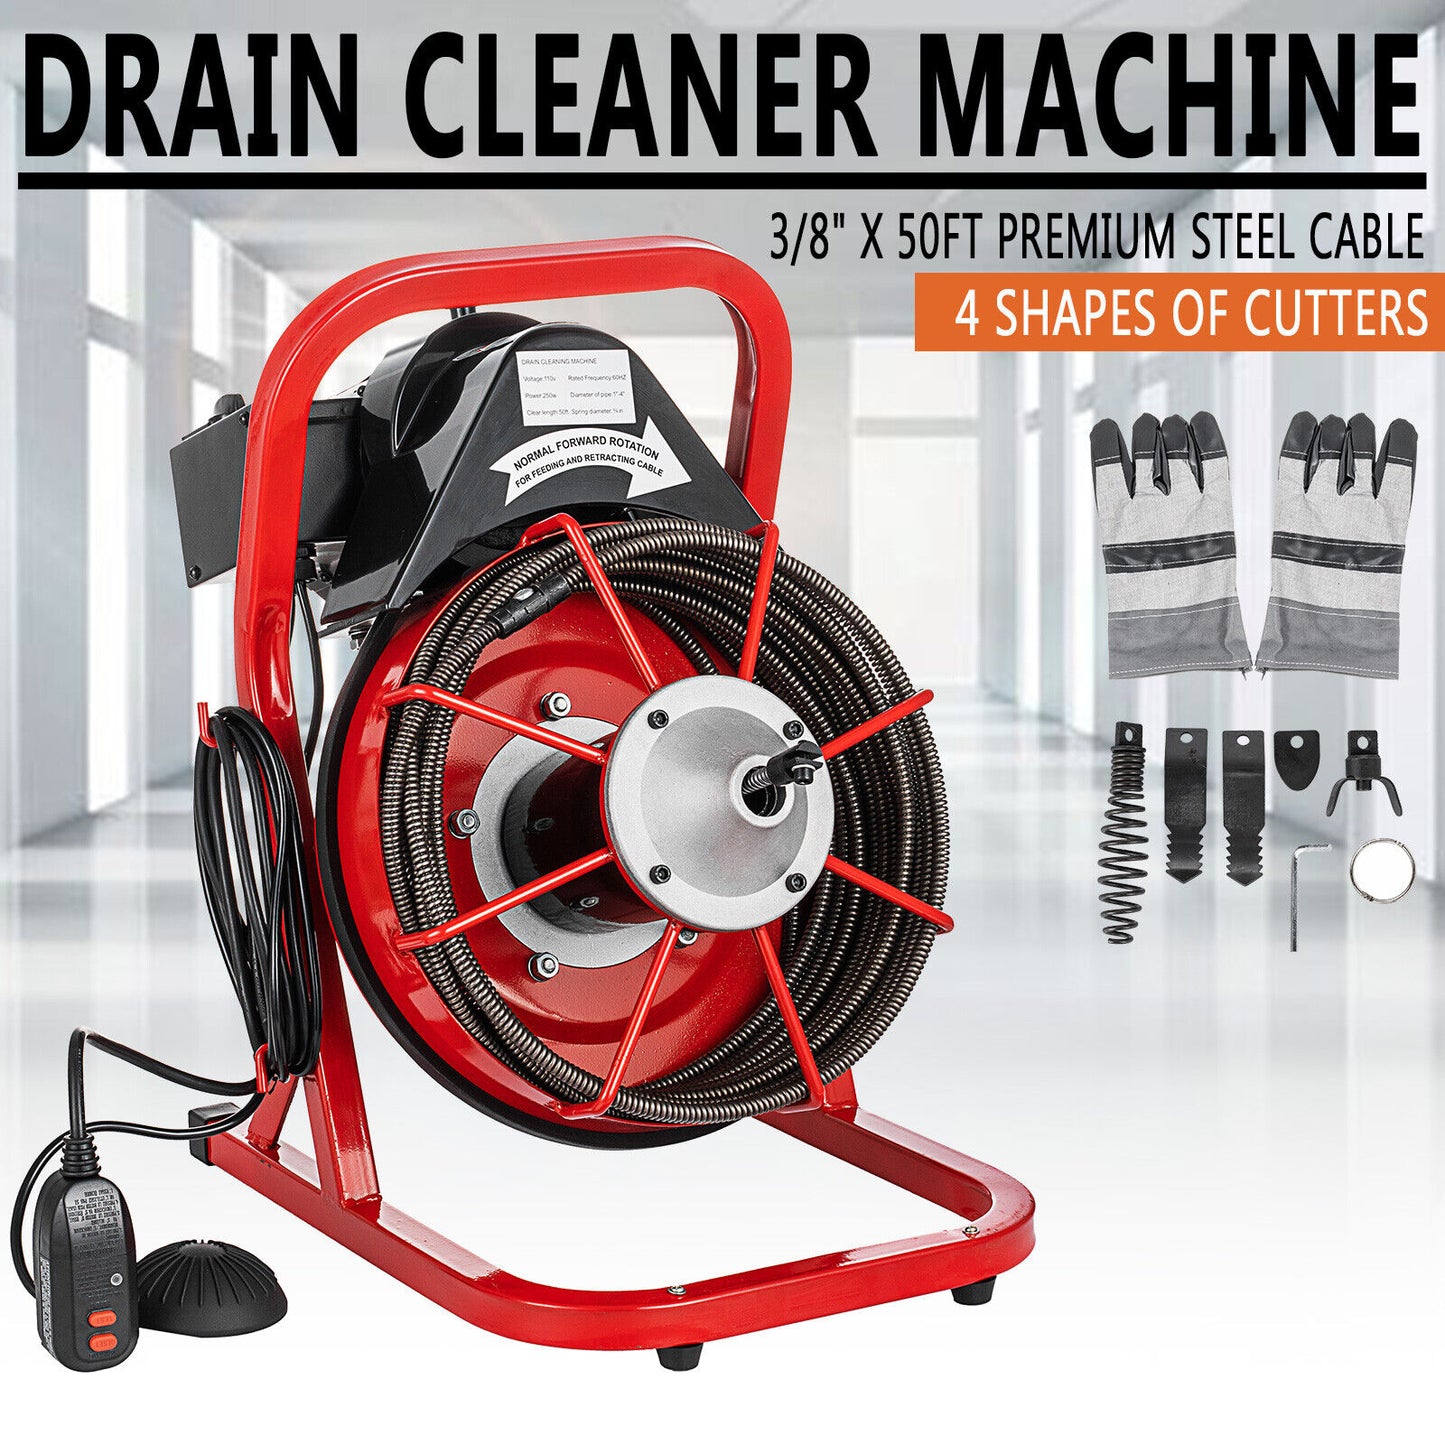 Electric 50'x3/8" Drain Auger Cleaner Sewer Snake Cleaning Machine W/ 5 Cutters